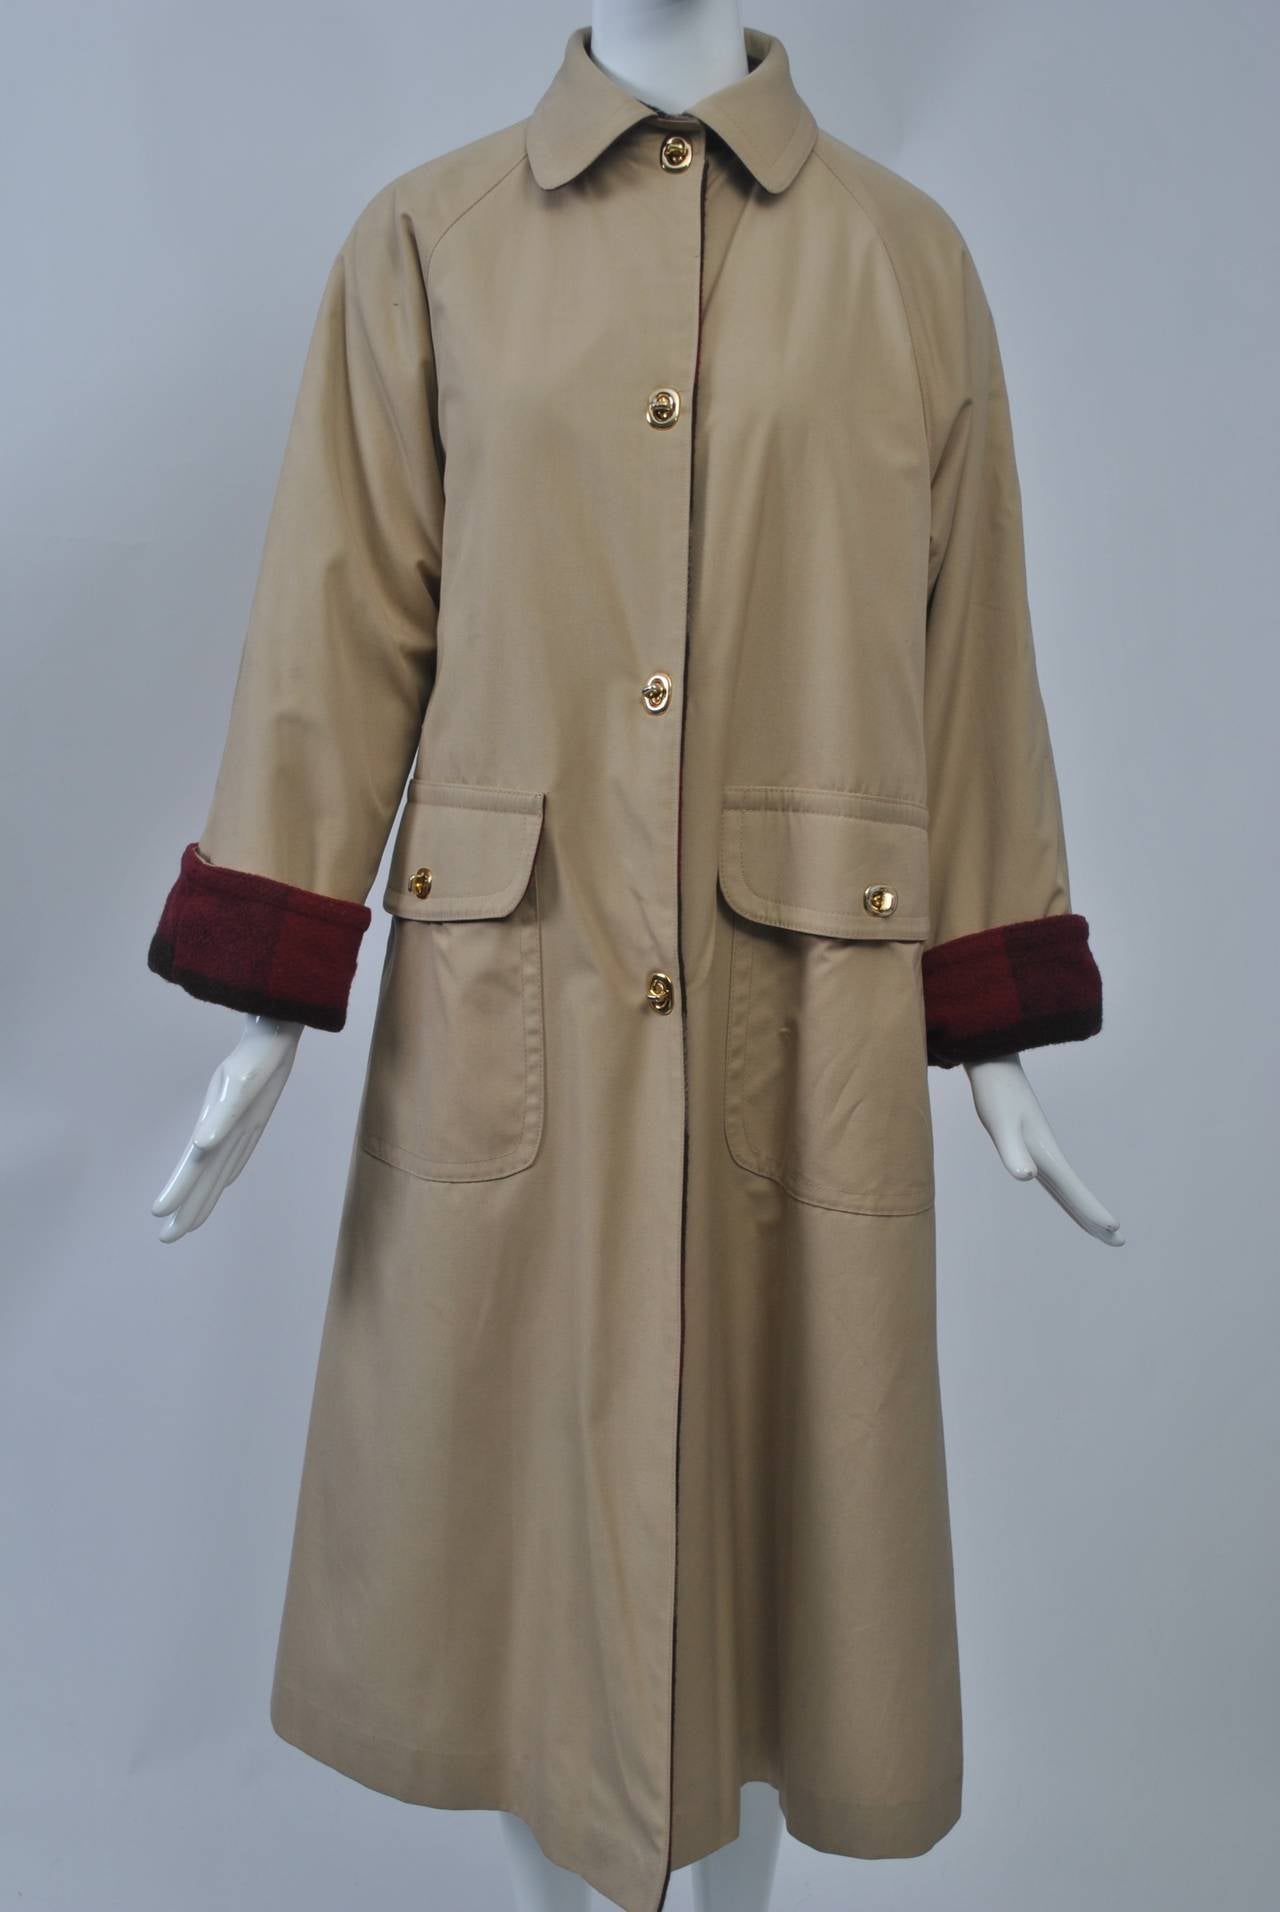 Bonnie Cashin tan poplin swing-style coat featuring her signature toggle closures and large patch pockets. Lined in plaid wool for warmth.